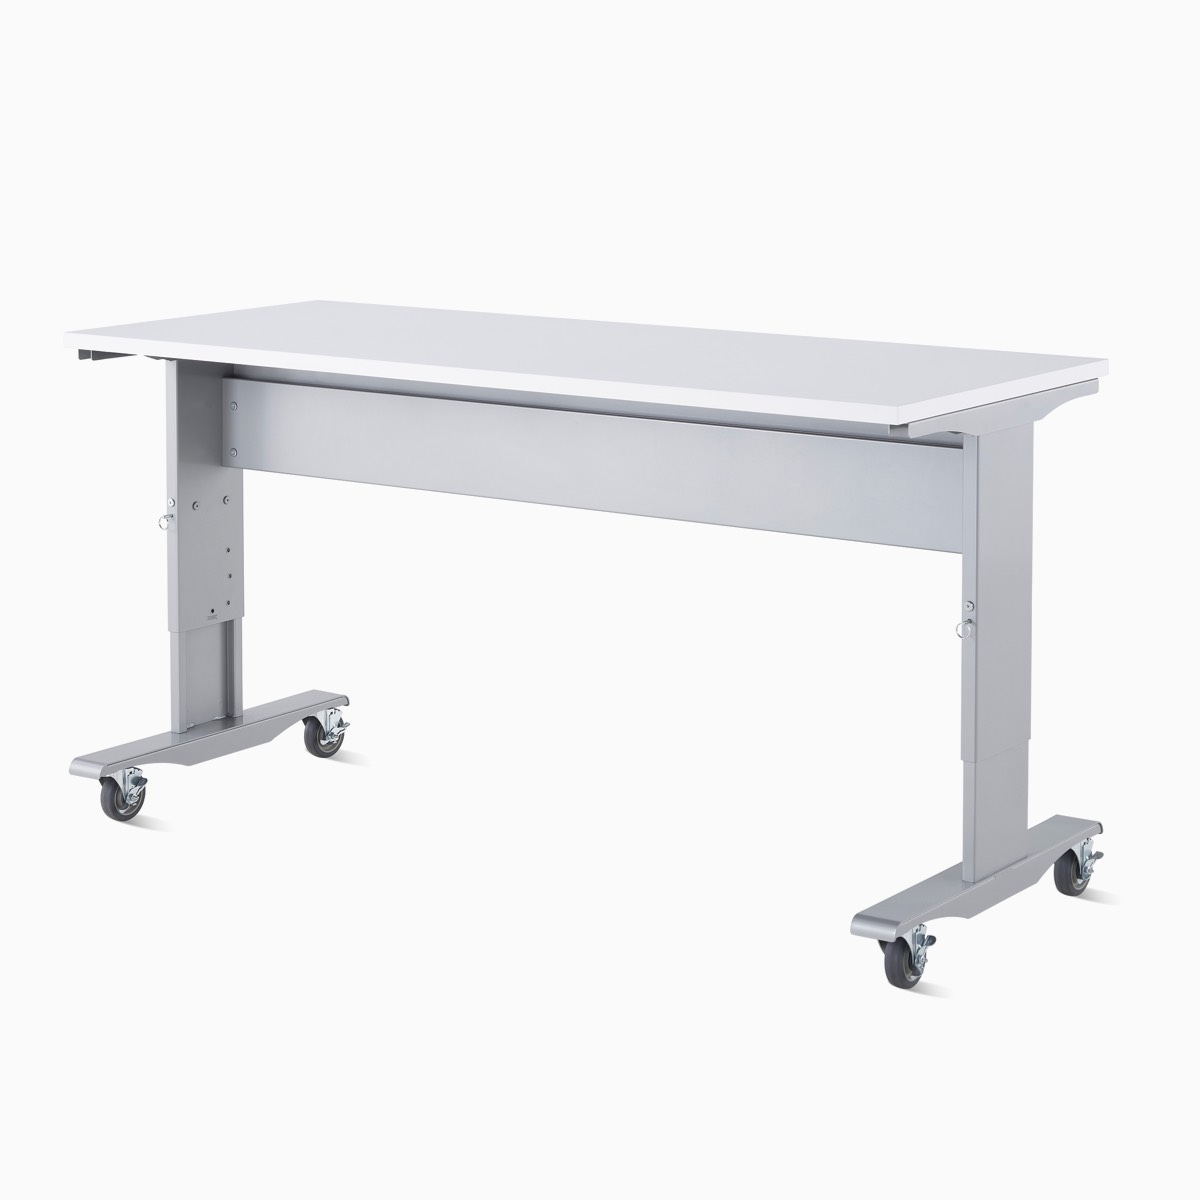 Detail of a Co/Struc System mobile and height-adjustable work process table with a silver frame and white top surface.